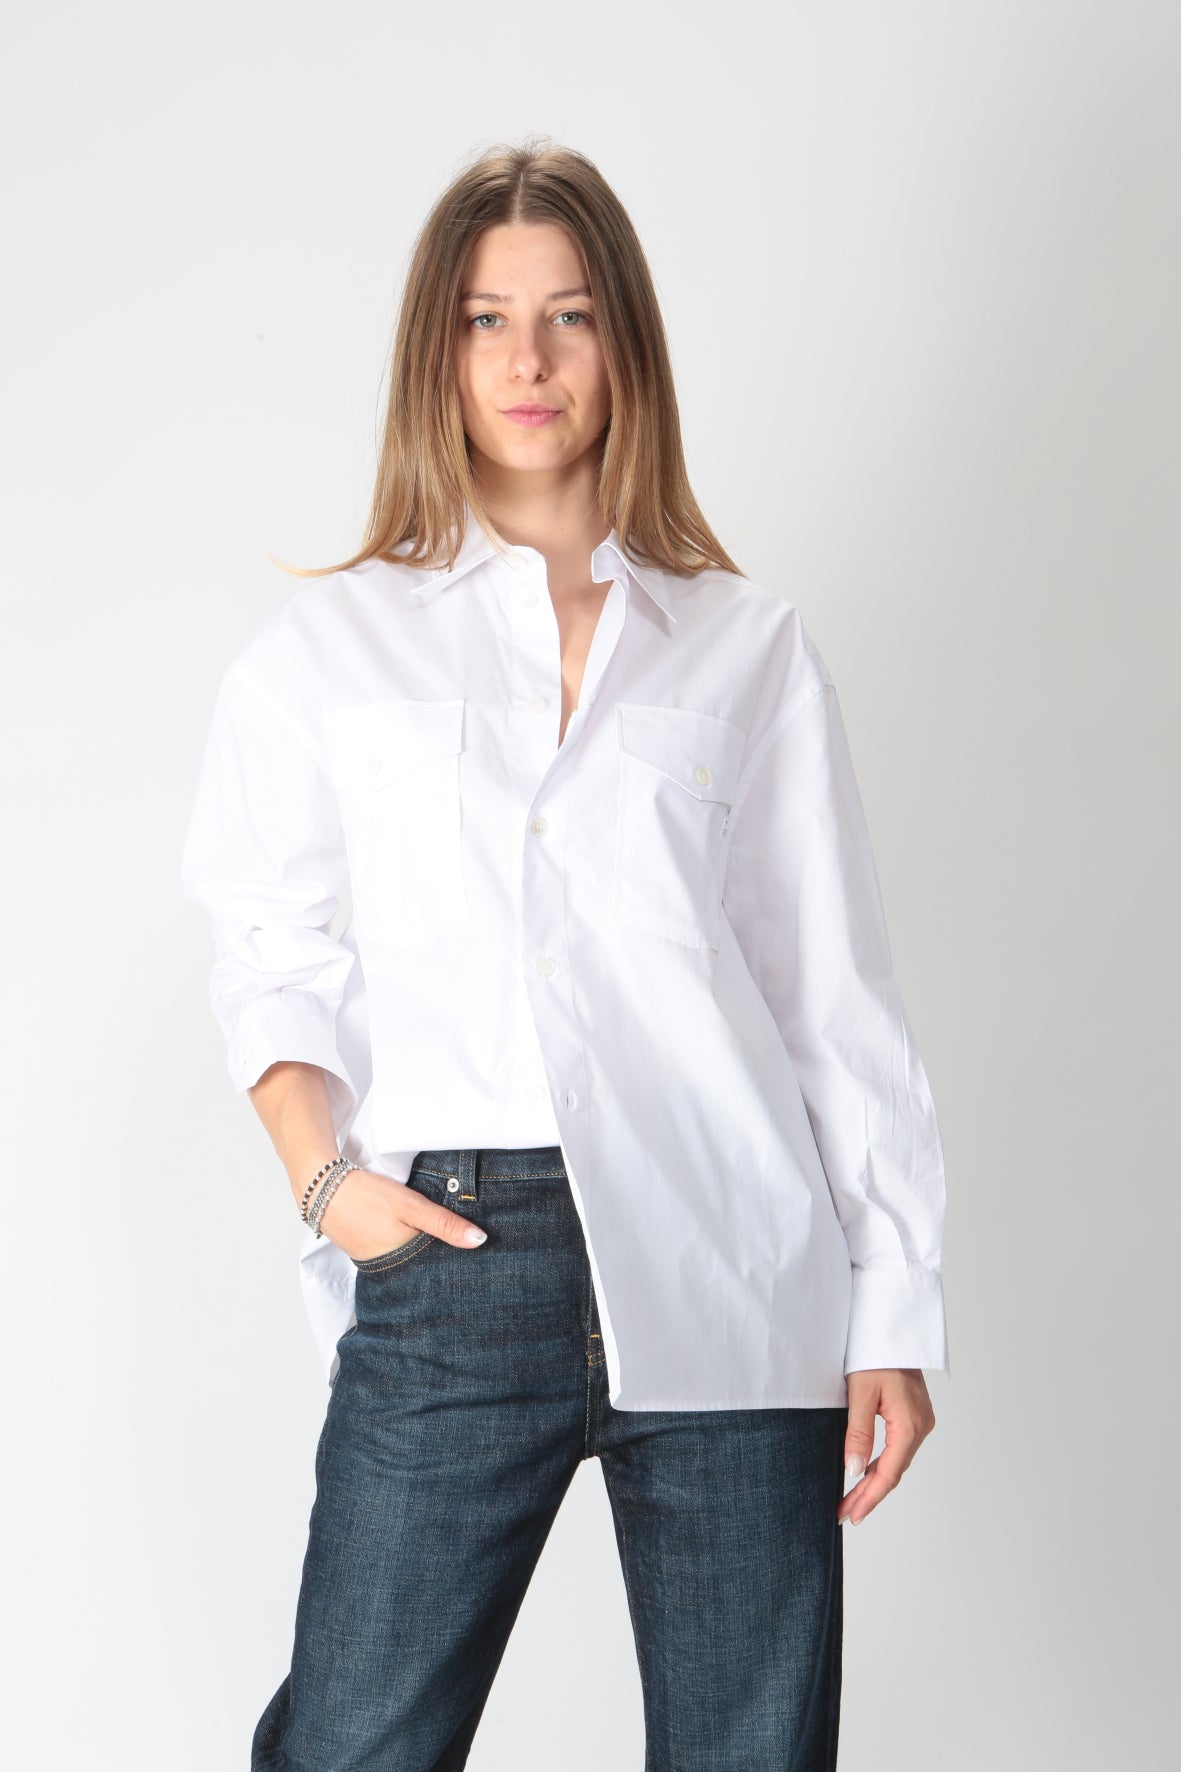 https://admin.shopify.com/store/gulieshop/products/9591008526685#:~:text=Invia-,Department%205%20Camicia%20over%20Monkeys%20DS51849D2TF0020%20000,-Contenuto%20multimediale%201